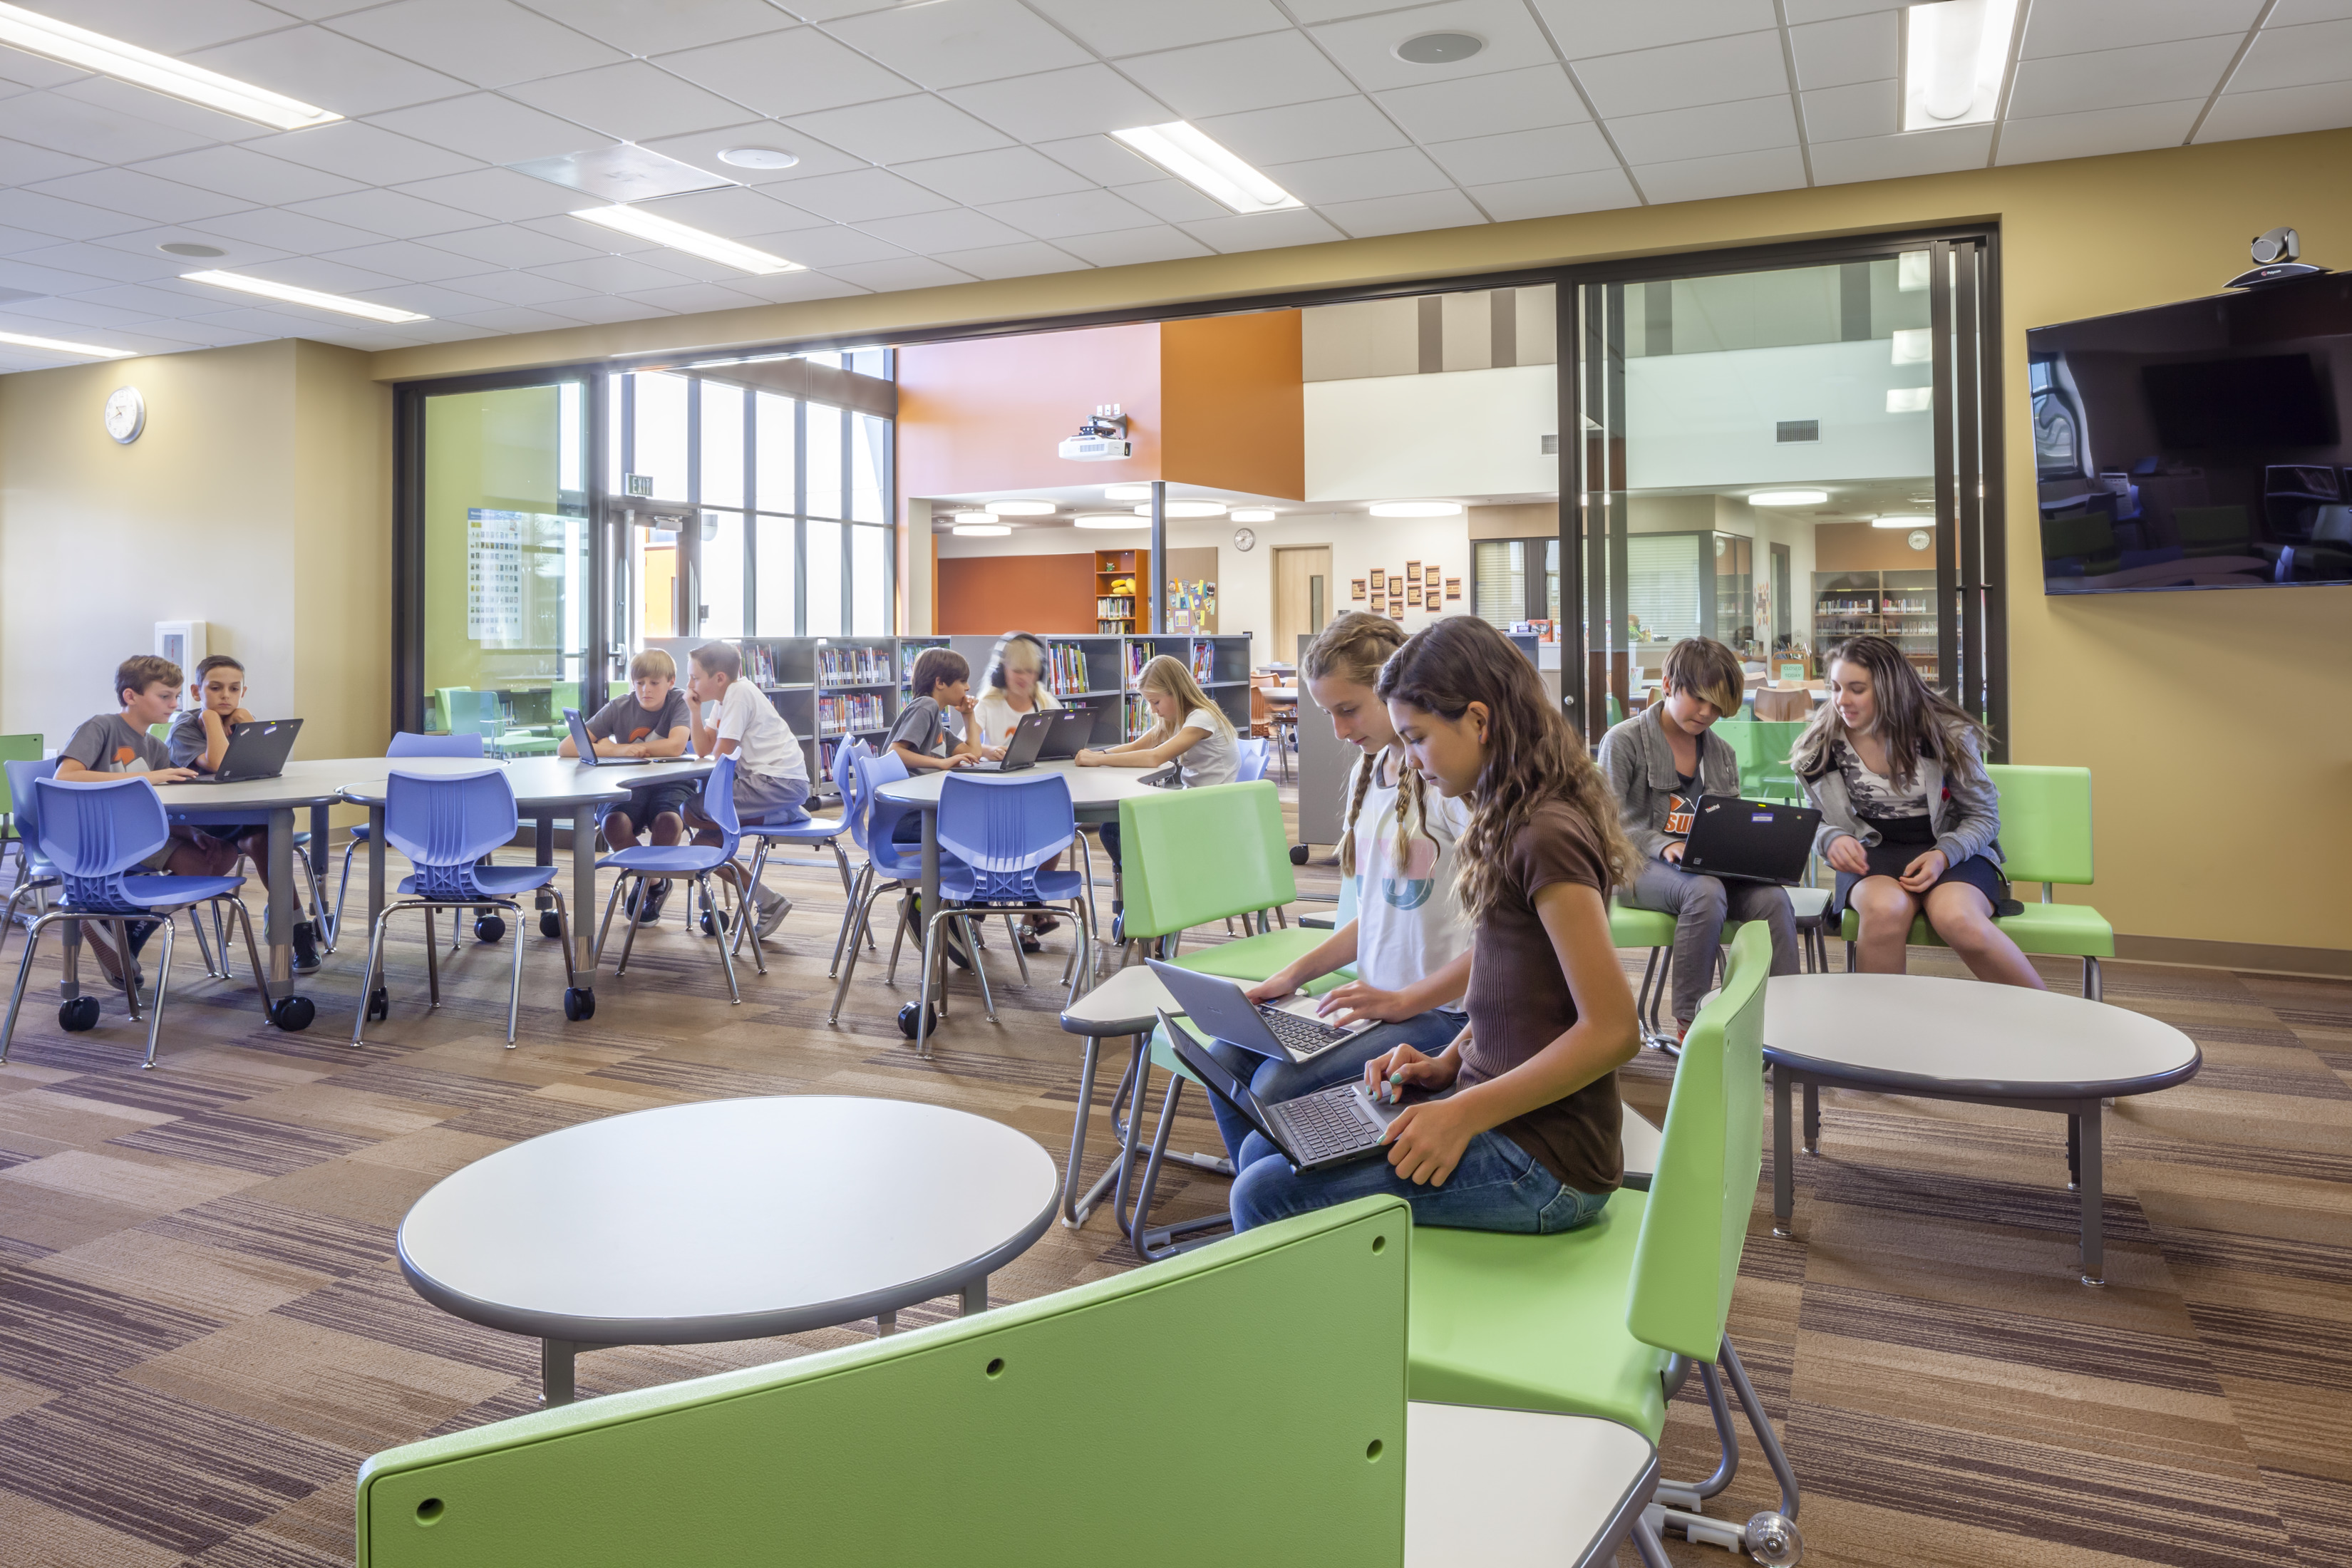 Creative concepts of interior design: sliding glass doors to open or close off education spaces can combine with classroom furniture innovations for a flexible space